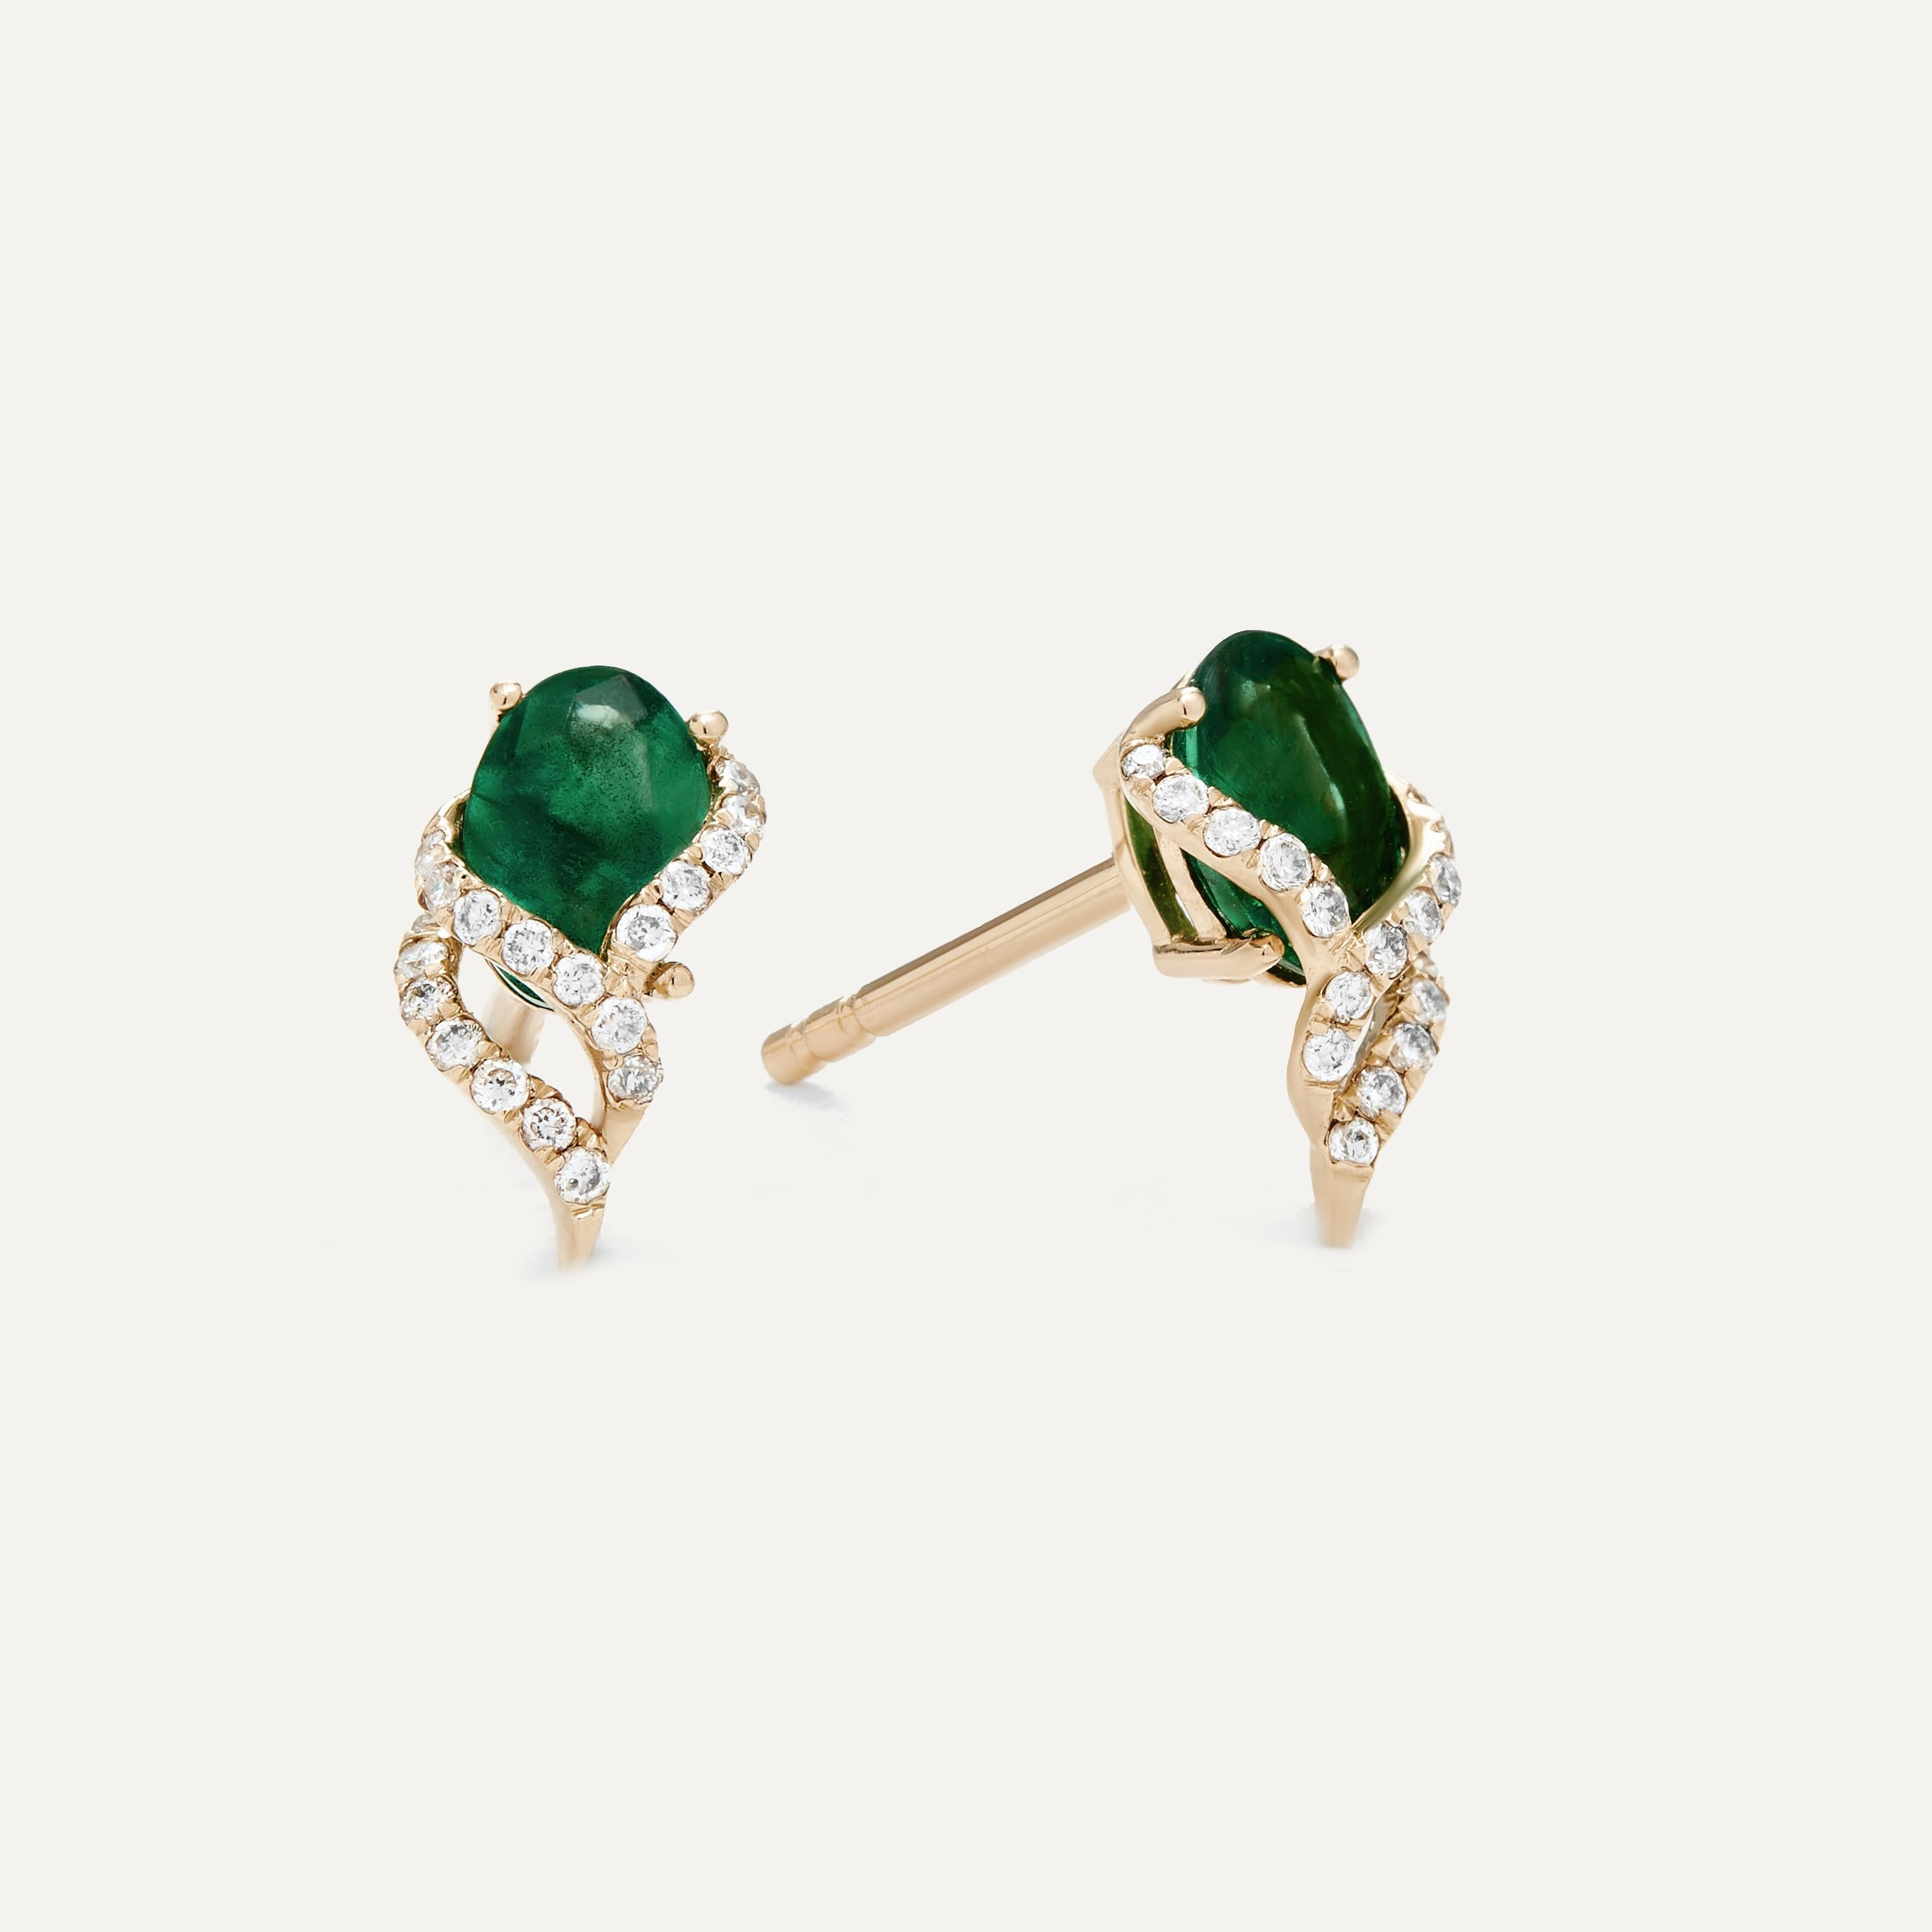 These Diamond Emerald Studs are a fusion of modern aesthetics and timeless elegance. These stud earrings feature a unique combination of white diamonds and vibrant emeralds, showcasing the perfect harmony between these two exquisite gemstones. The